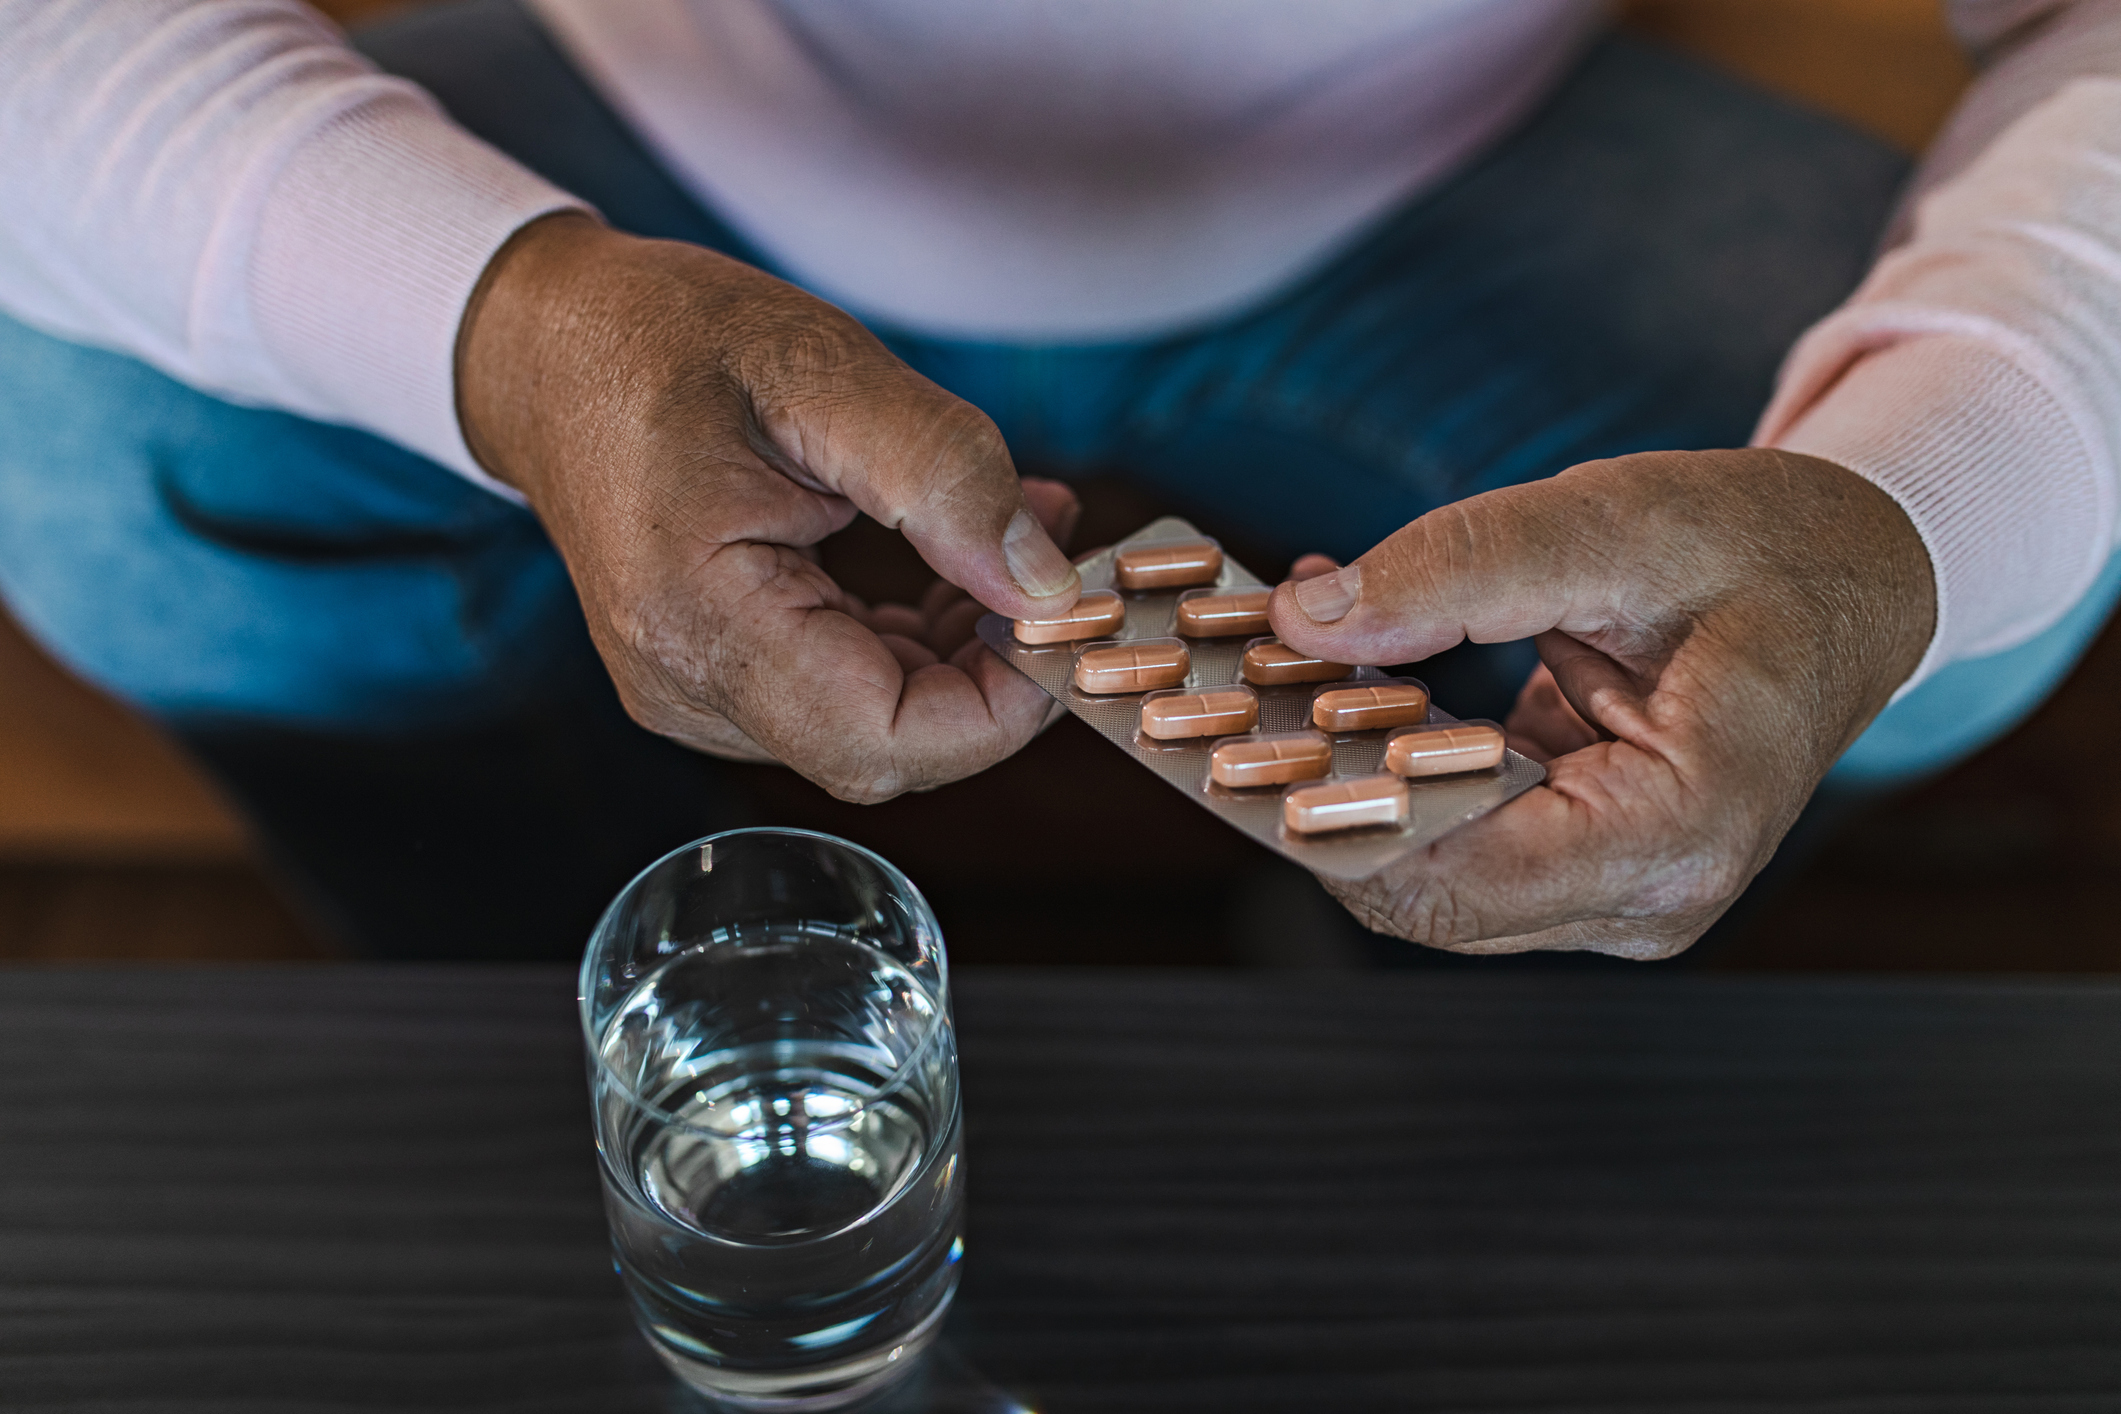 A Black man's hands holding a package of pills next to a glass of water